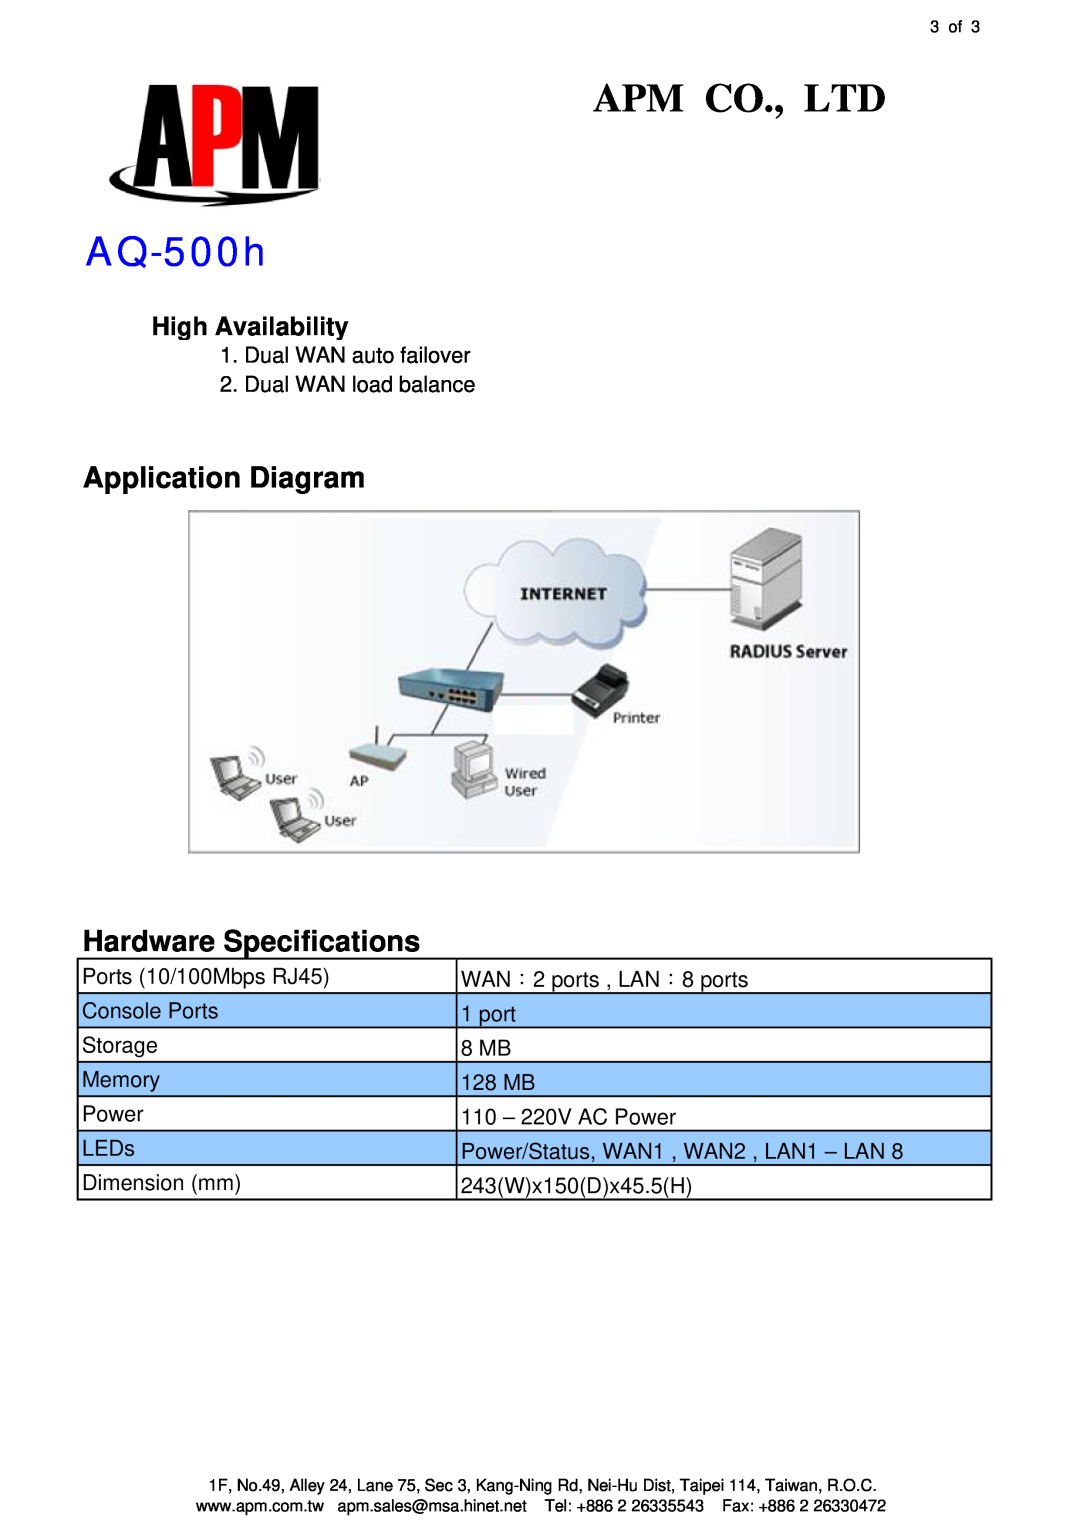 APM AQ-500h specifications Application Diagram Hardware Specifications, High Availability 